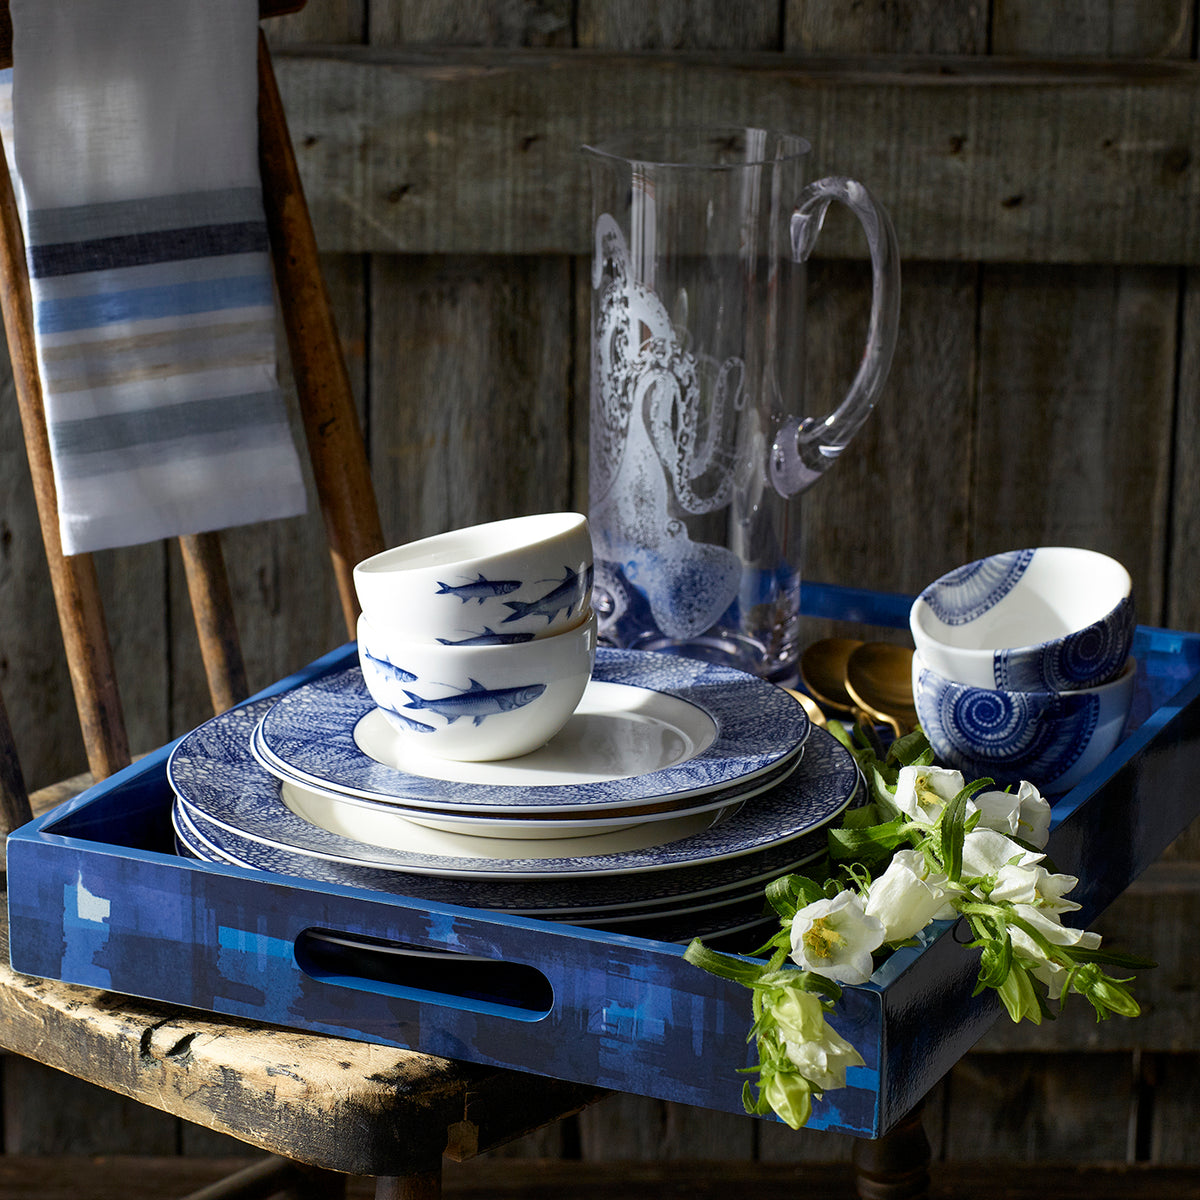 A Caskata Artisanal Home wooden tray with a Shells Snack Bowl and a pitcher among blue and white dishes, reminiscent of a shell treasure.